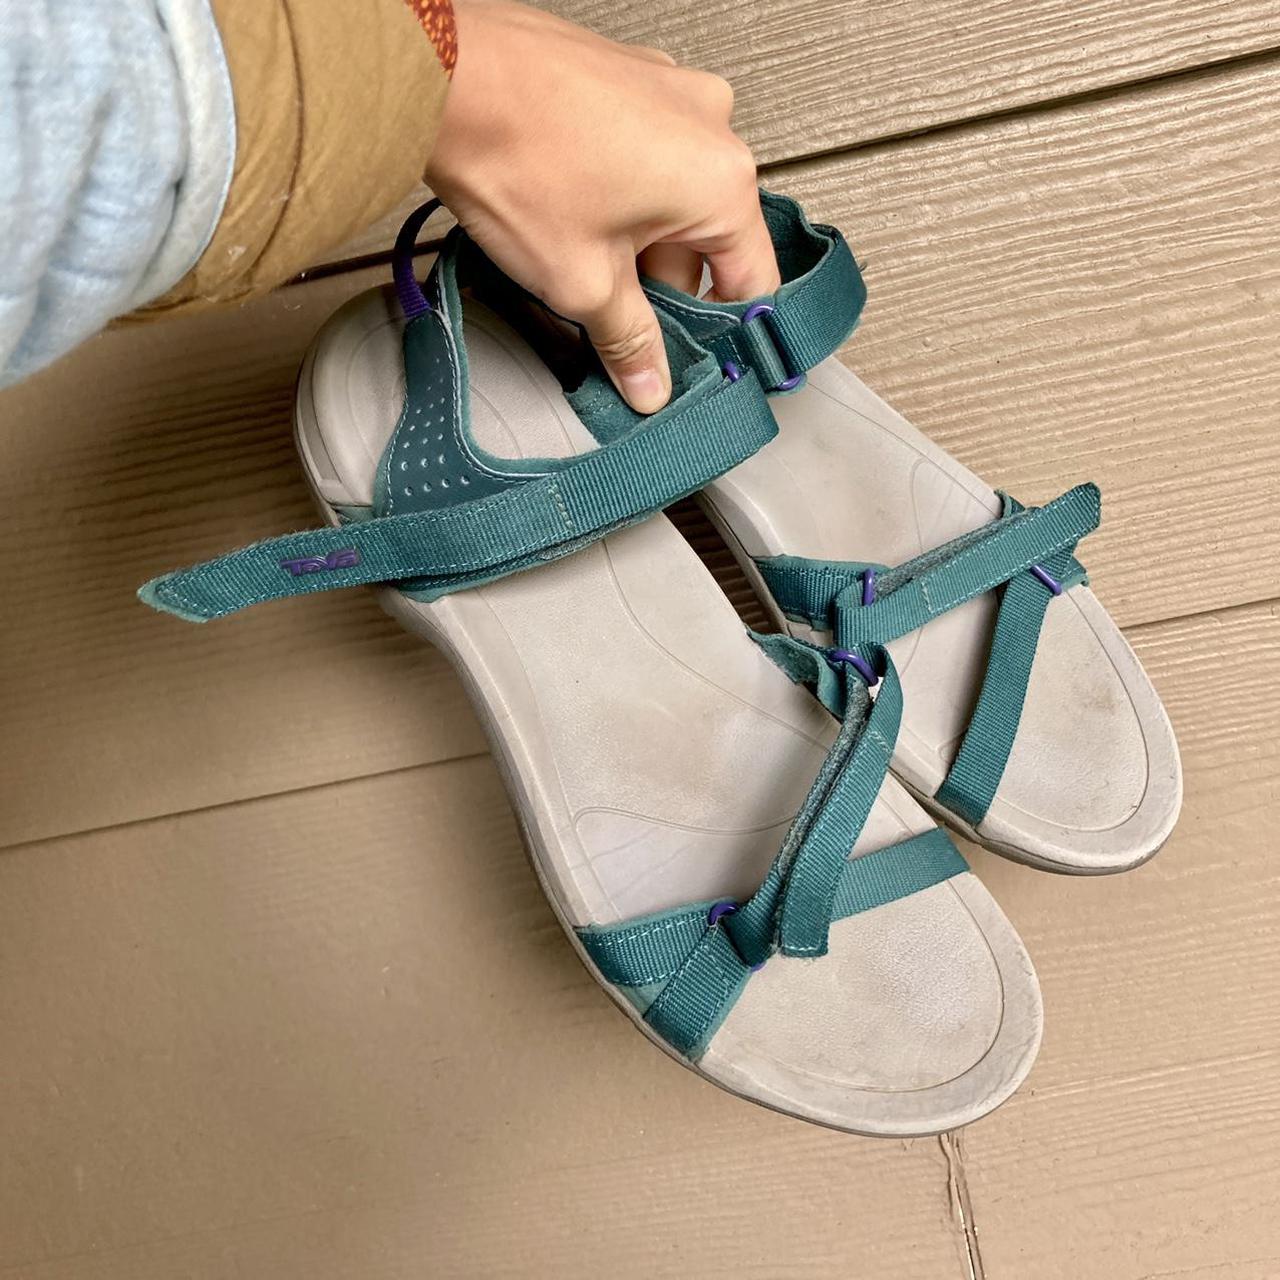 Teva Women's Blue and Green Sandals